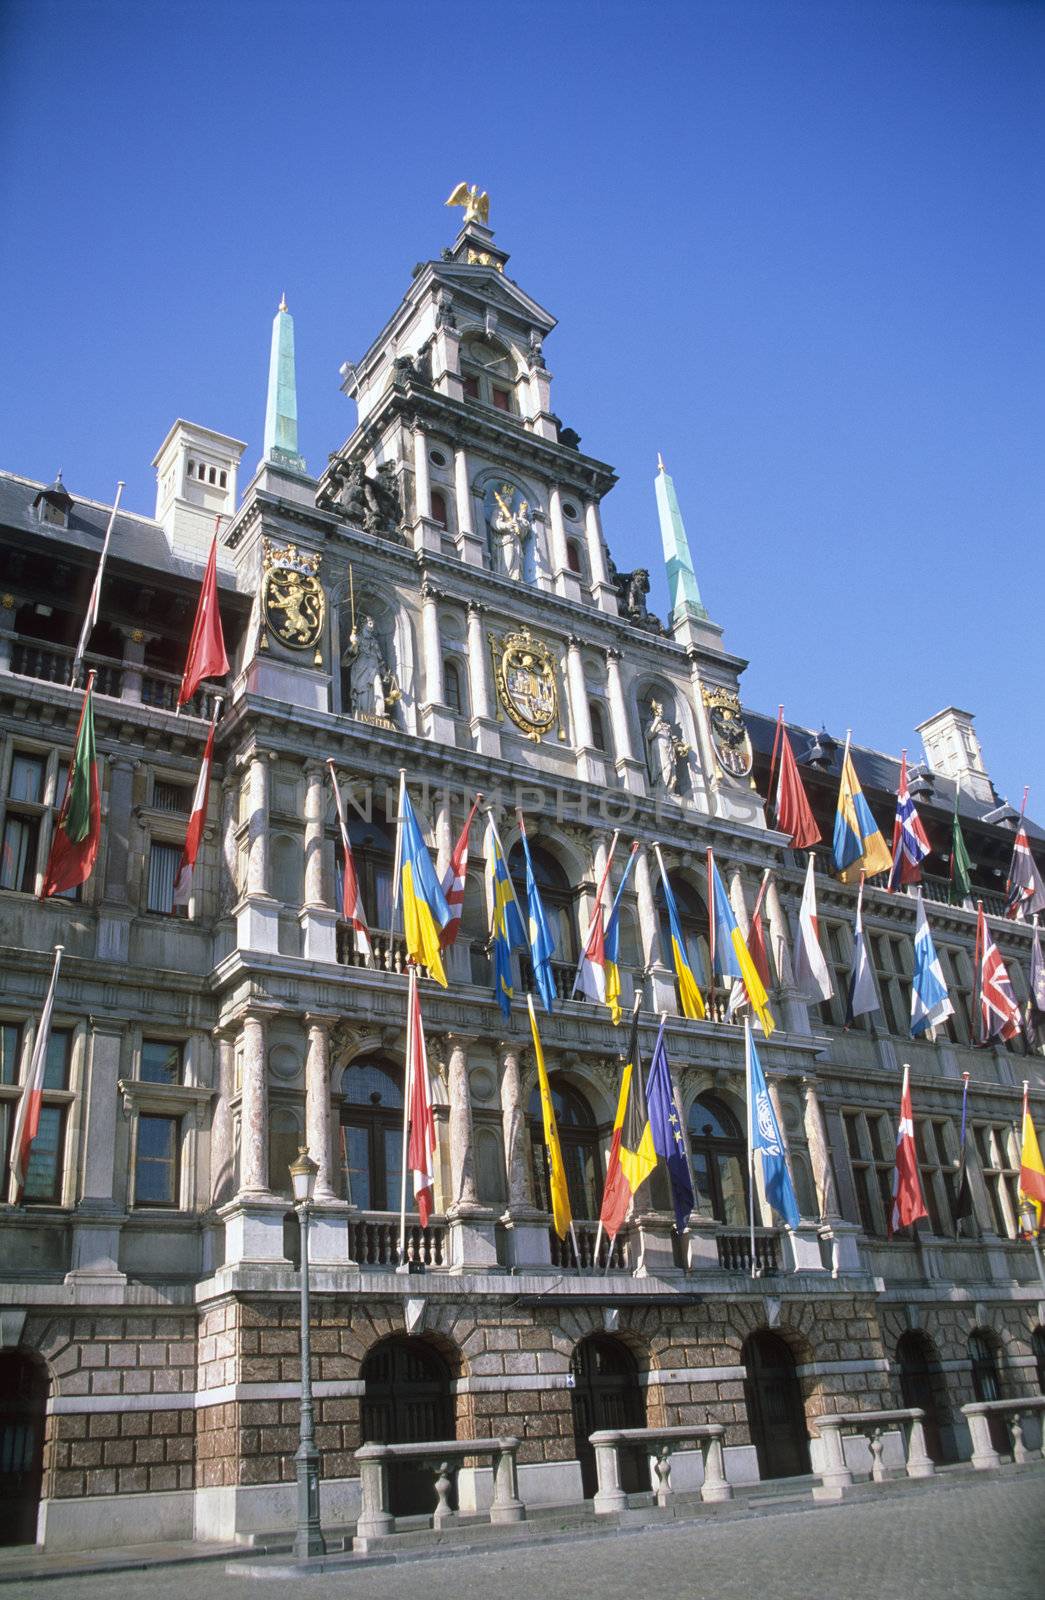 The city hall of Antwerp, Belgium is covered with flags.